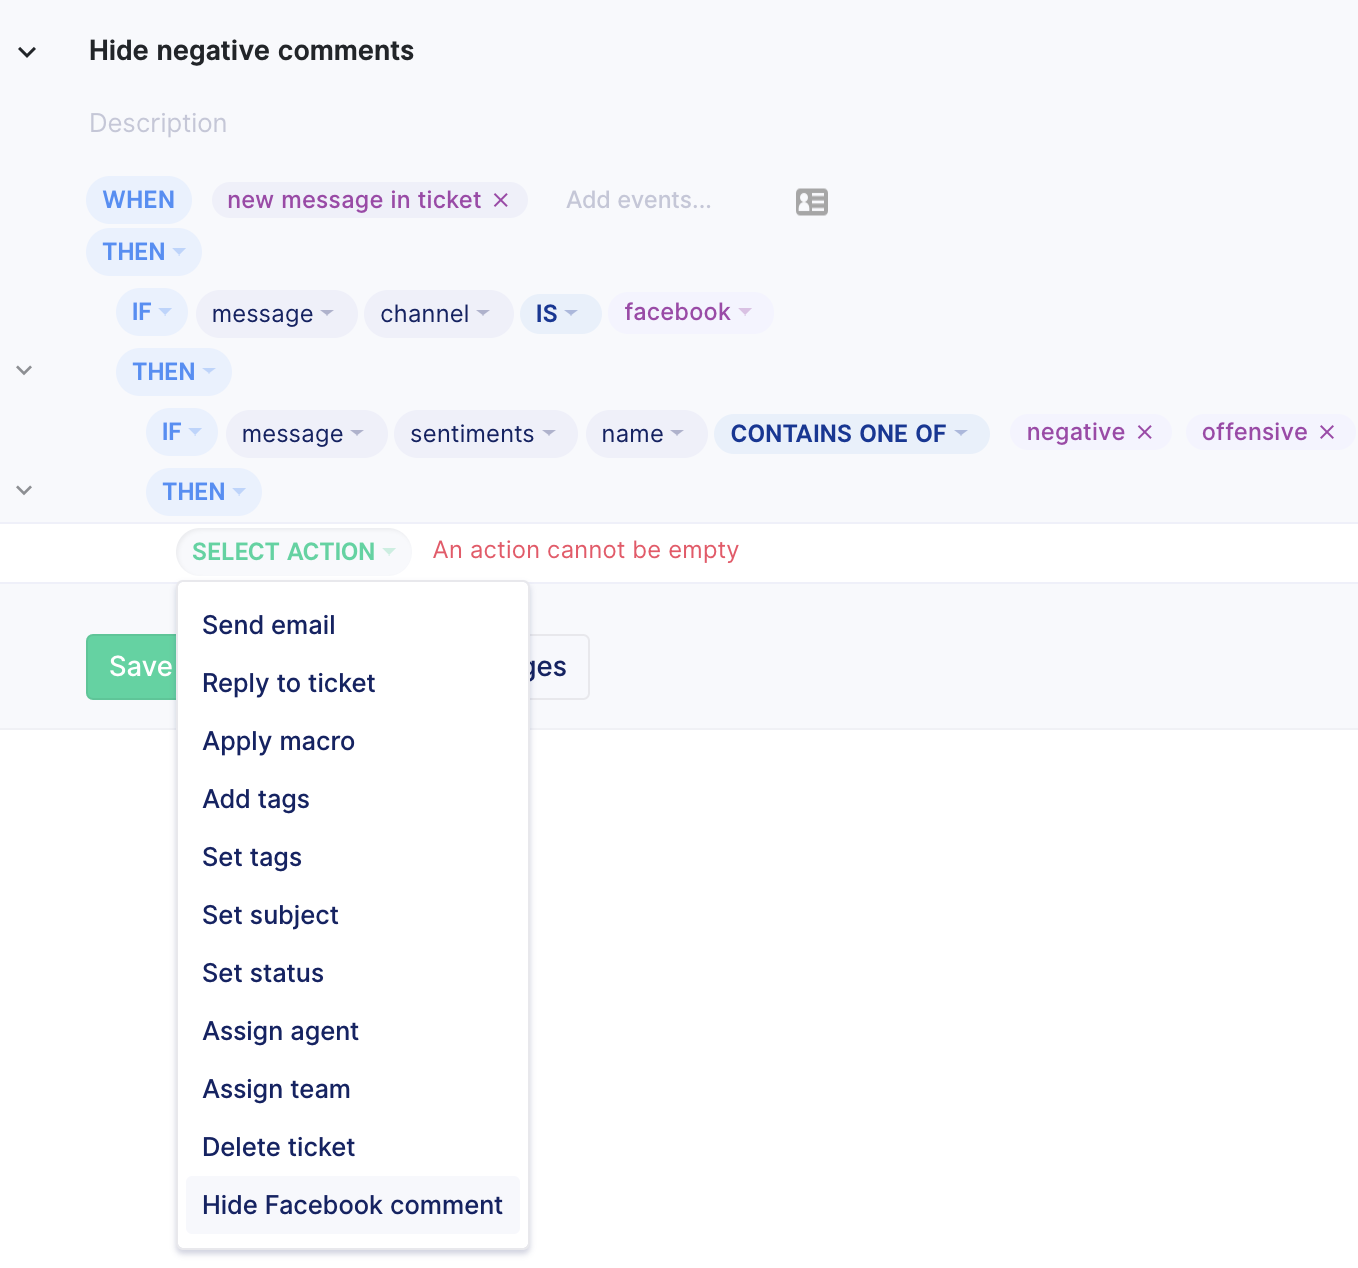 New action in rules: Hide Facebook comment